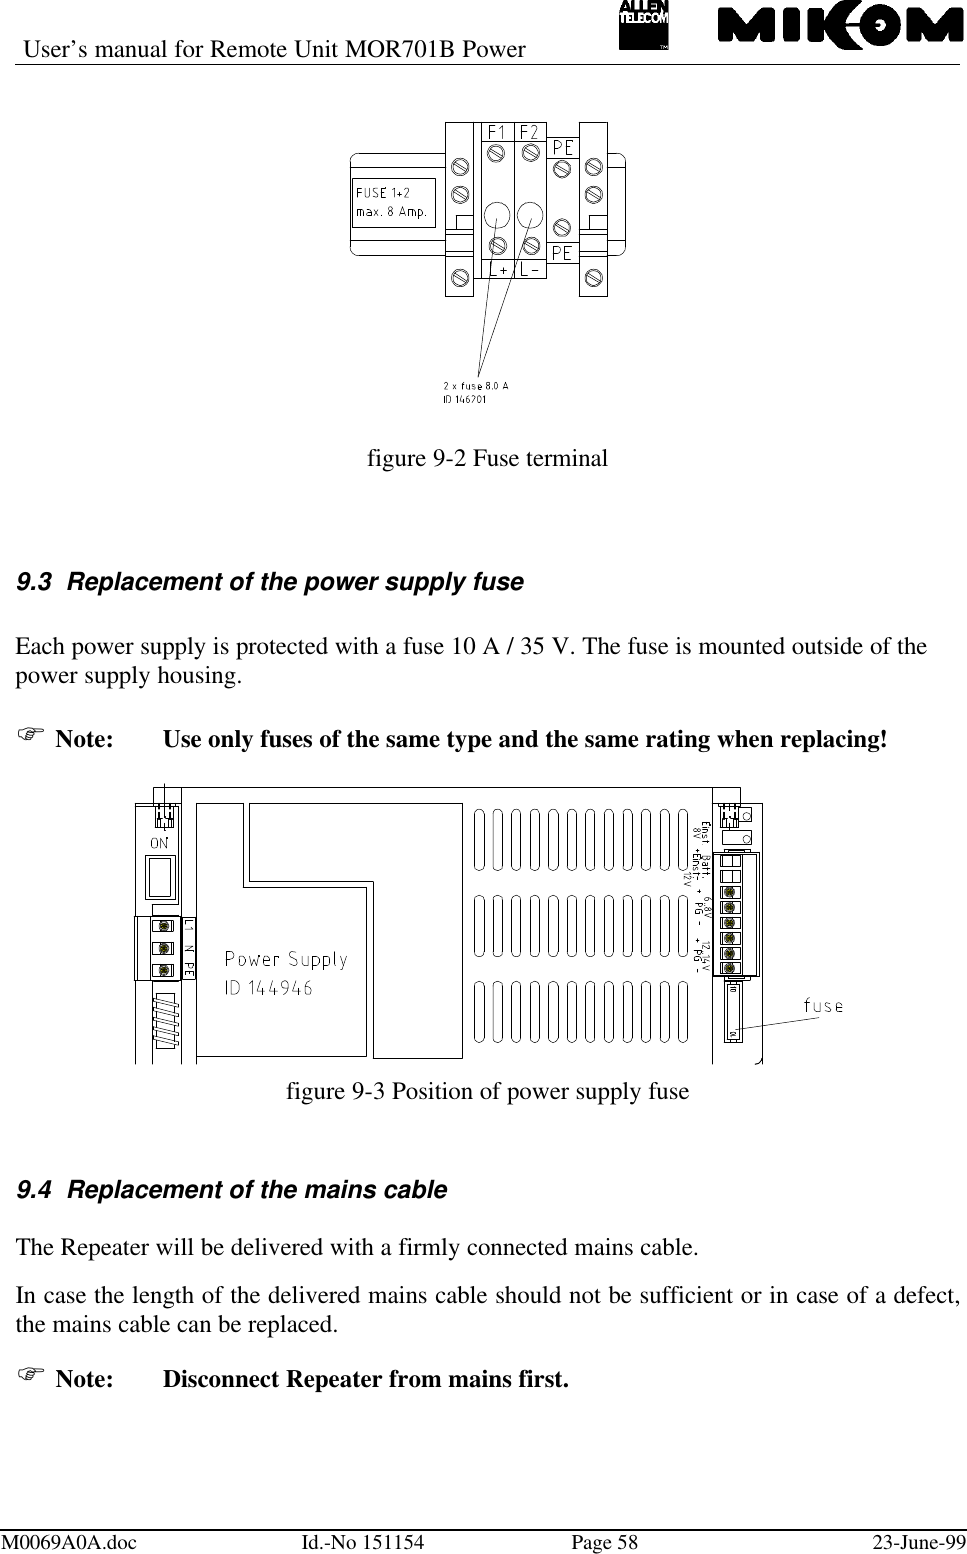 User’s manual for Remote Unit MOR701B PowerM0069A0A.doc Id.-No 151154 Page 58 23-June-99figure 9-2 Fuse terminal9.3 Replacement of the power supply fuseEach power supply is protected with a fuse 10 A / 35 V. The fuse is mounted outside of thepower supply housing.F Note:  Use only fuses of the same type and the same rating when replacing!figure 9-3 Position of power supply fuse9.4 Replacement of the mains cableThe Repeater will be delivered with a firmly connected mains cable.In case the length of the delivered mains cable should not be sufficient or in case of a defect,the mains cable can be replaced.F Note: Disconnect Repeater from mains first.